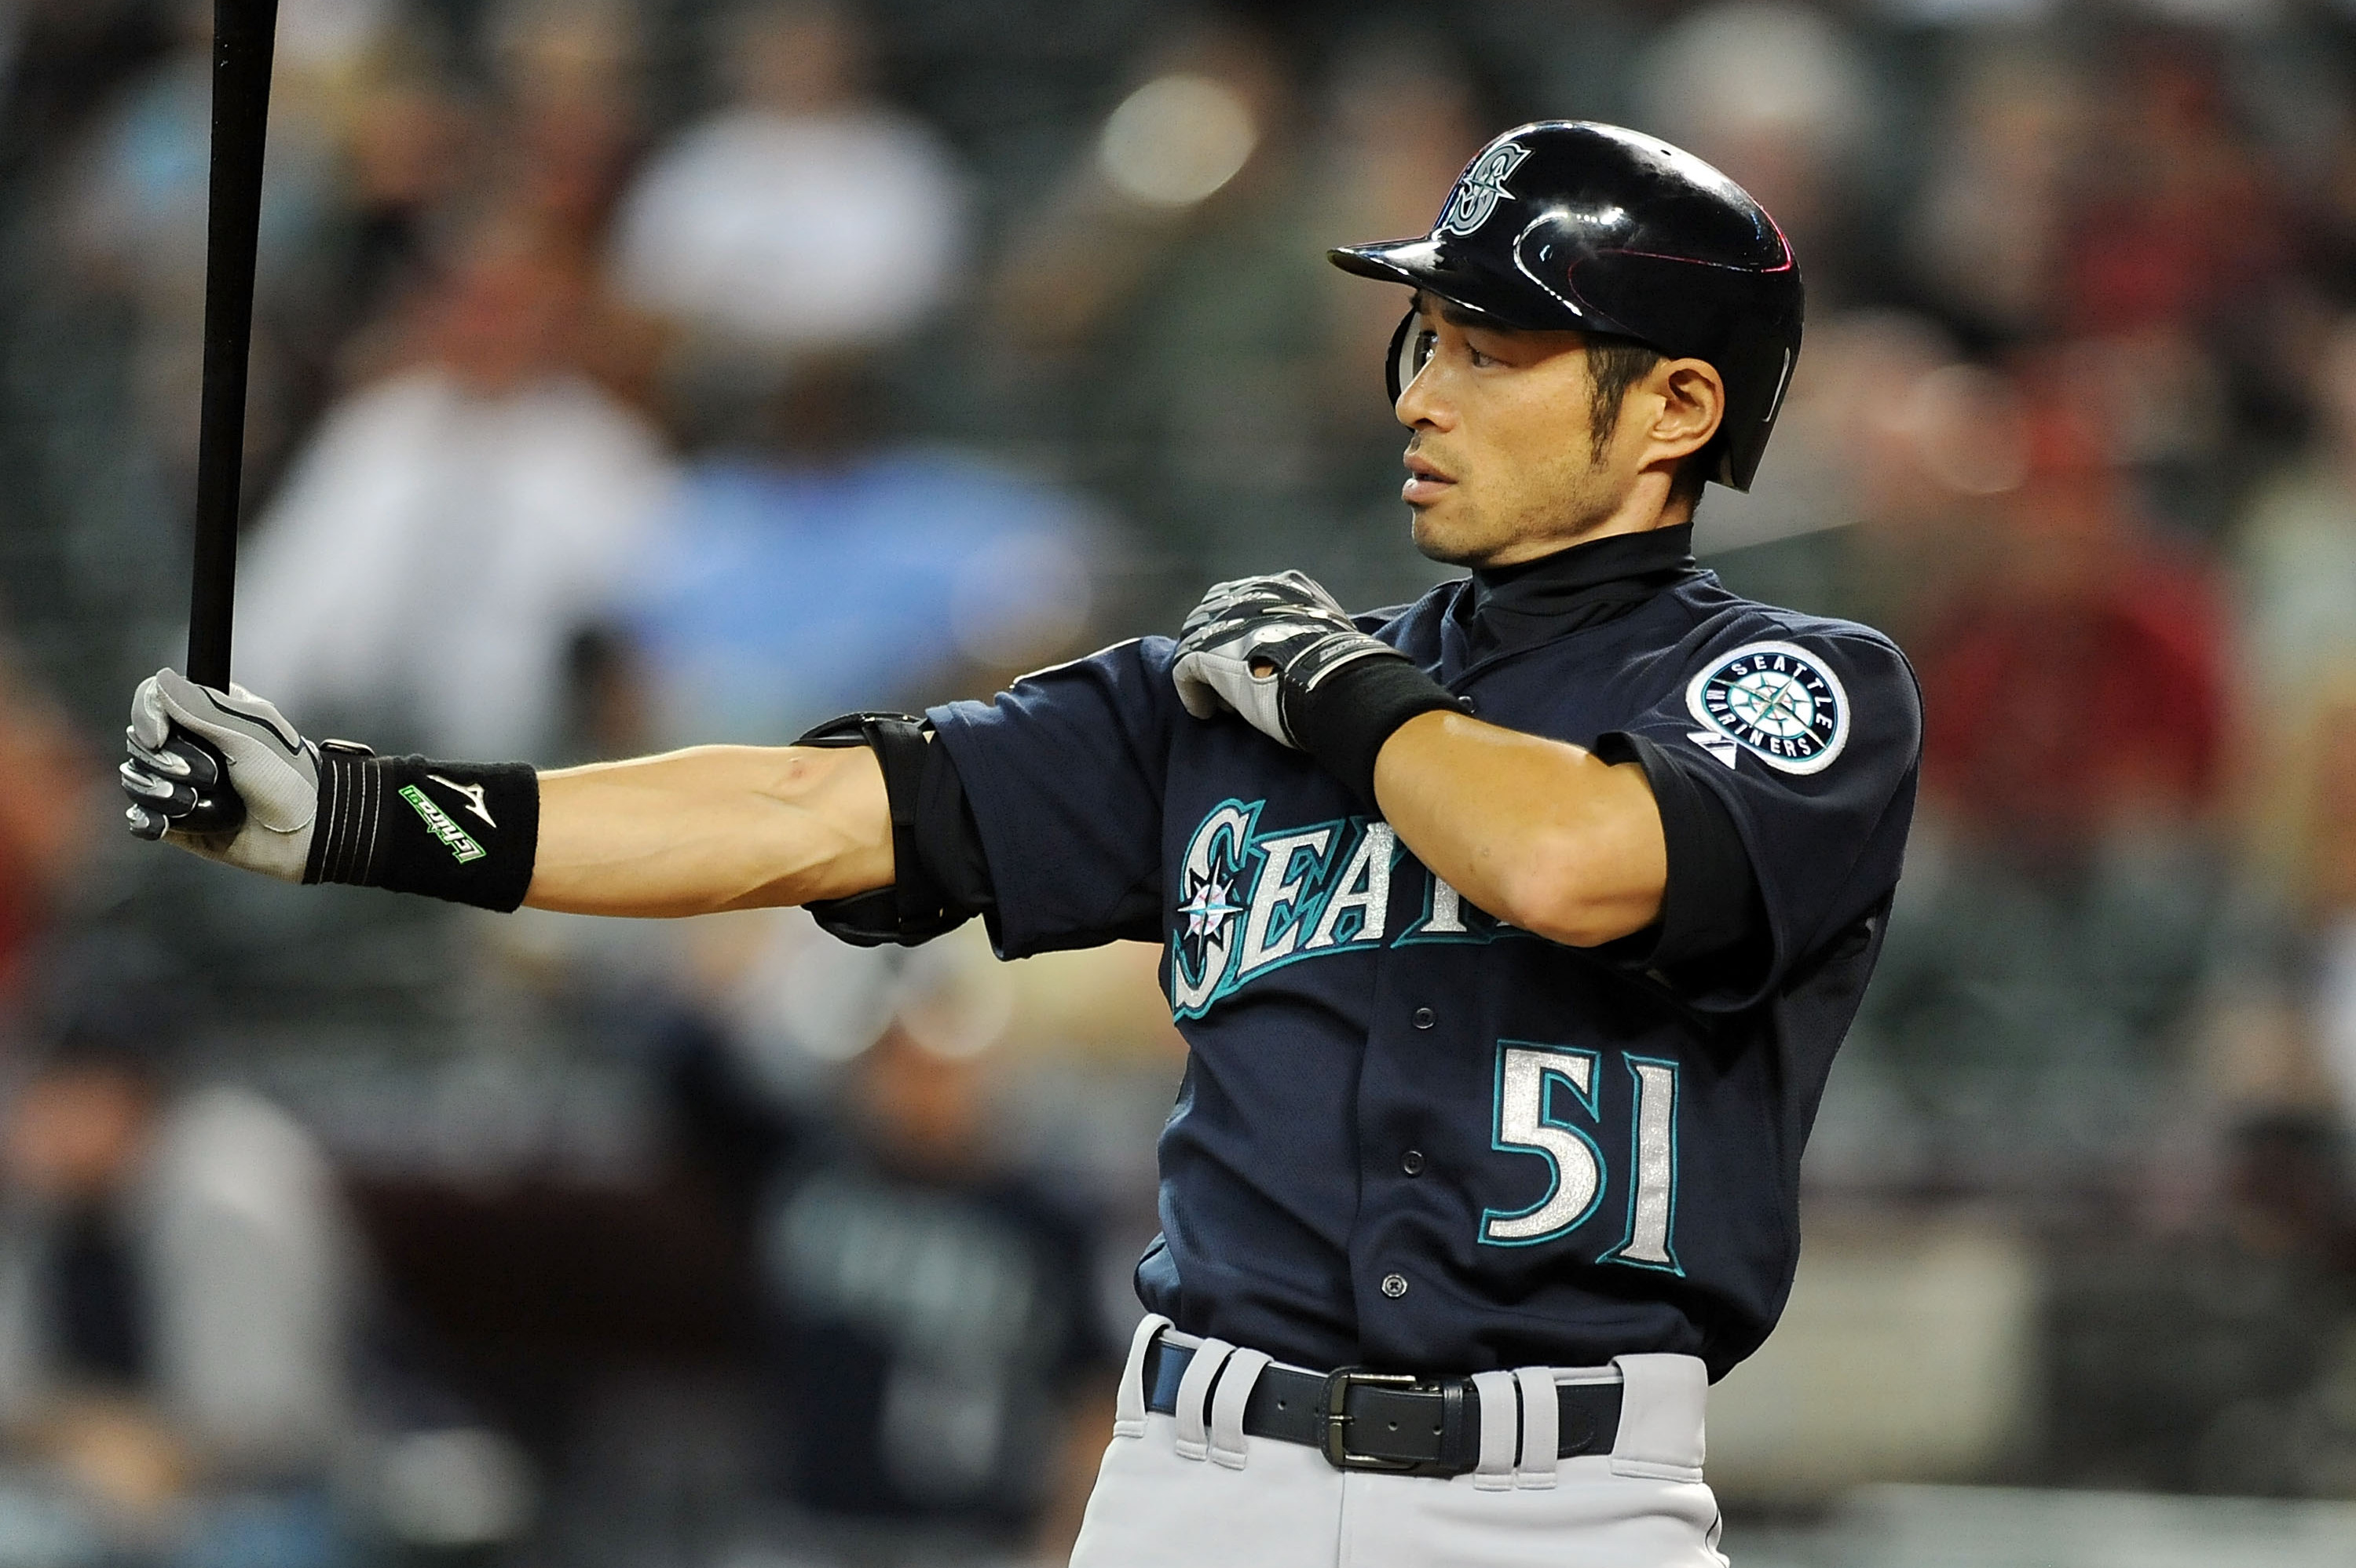 Ichiro Suzuki retires following Mariners series in Japan: 'I have achieved  so many of my dreams in baseball' 